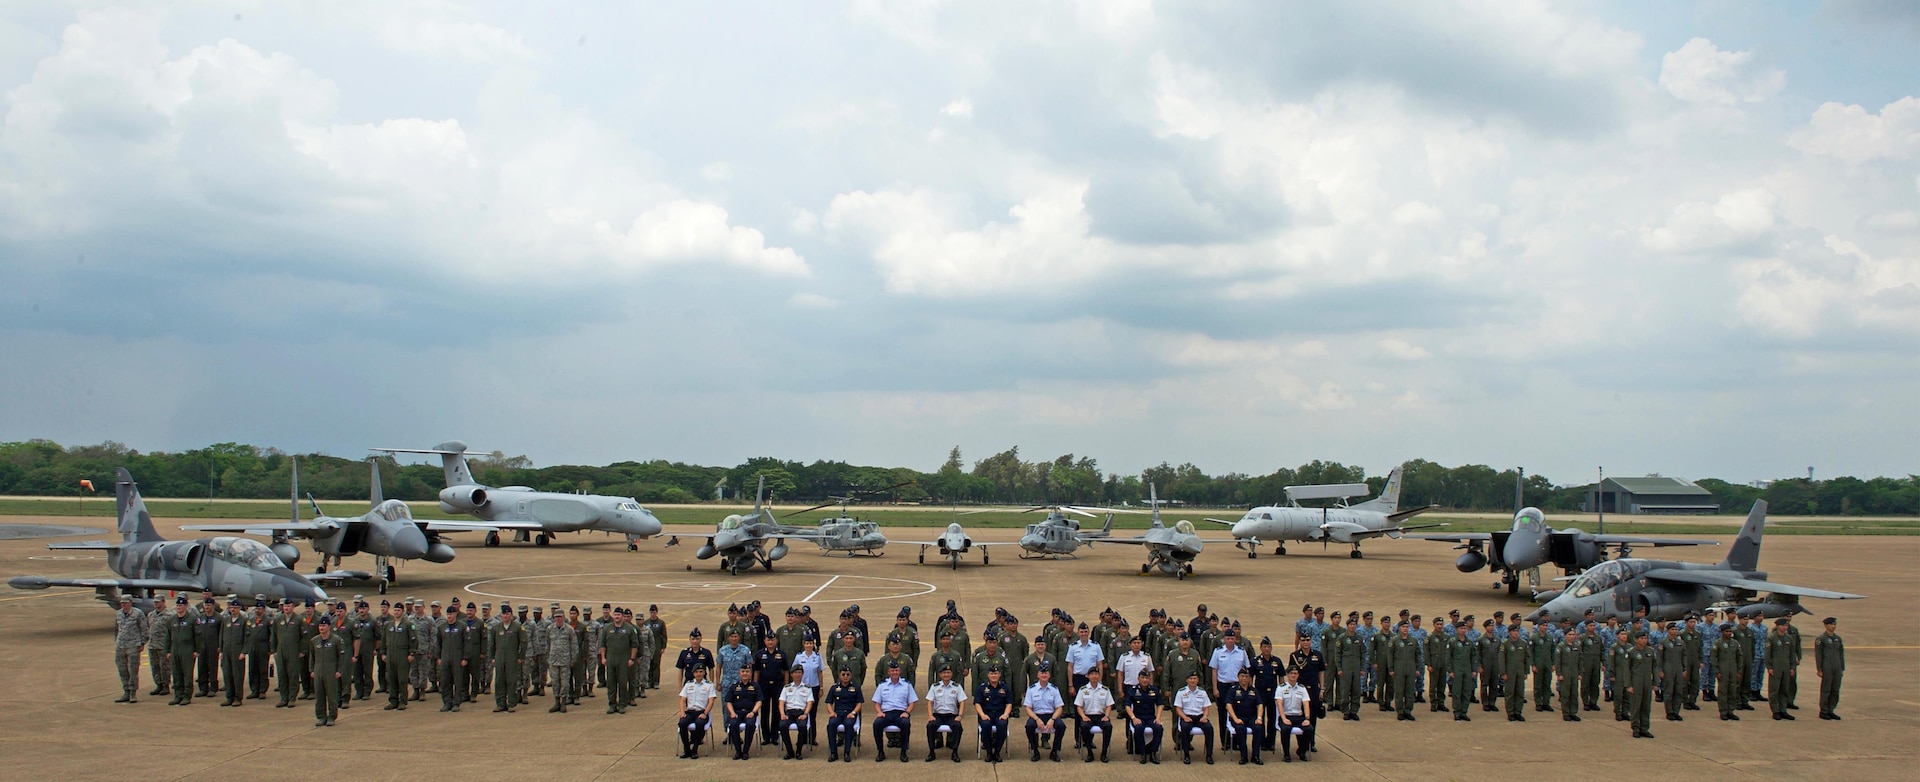 Cope Tiger 17 (CT17) participants during the closing ceremony for Cope Tiger 17 at Korat Royal Thai Air Force Base, Thailand, March 31, 2017. More than 1,200 U.S., Thai and Singaporean military members participated in CT17. The annual multilateral exercise is aimed at improving combined combat readiness and interoperability between the Republic of Singapore air force, Royal Thai air force, and U.S. Air Force, while concurrently enhancing the three nations' military relations.  